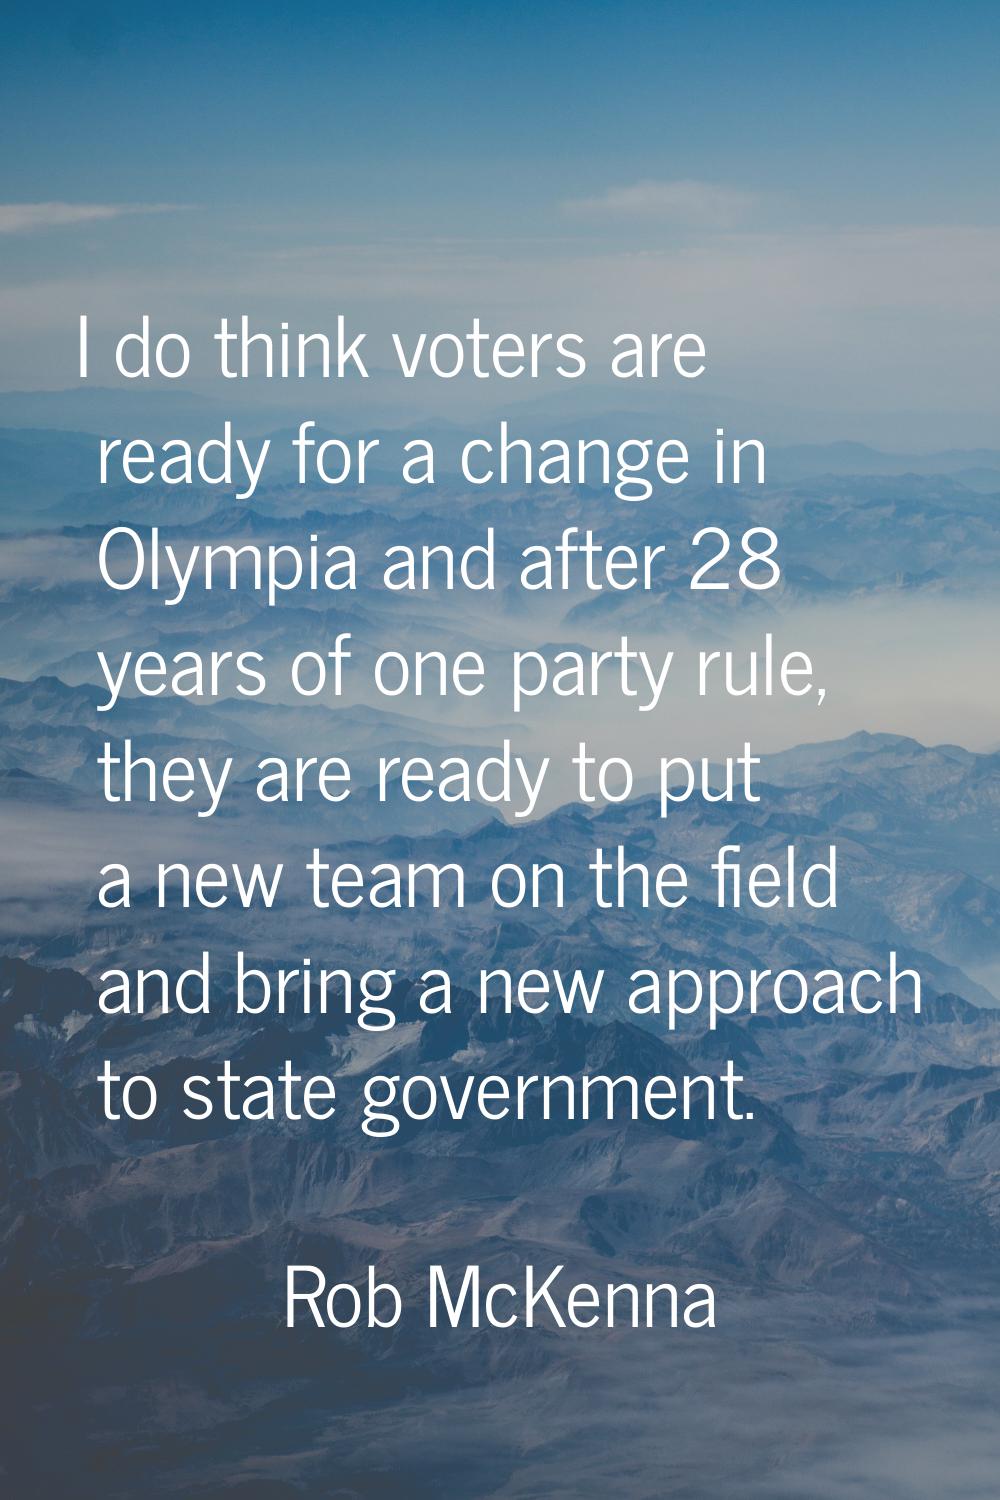 I do think voters are ready for a change in Olympia and after 28 years of one party rule, they are 